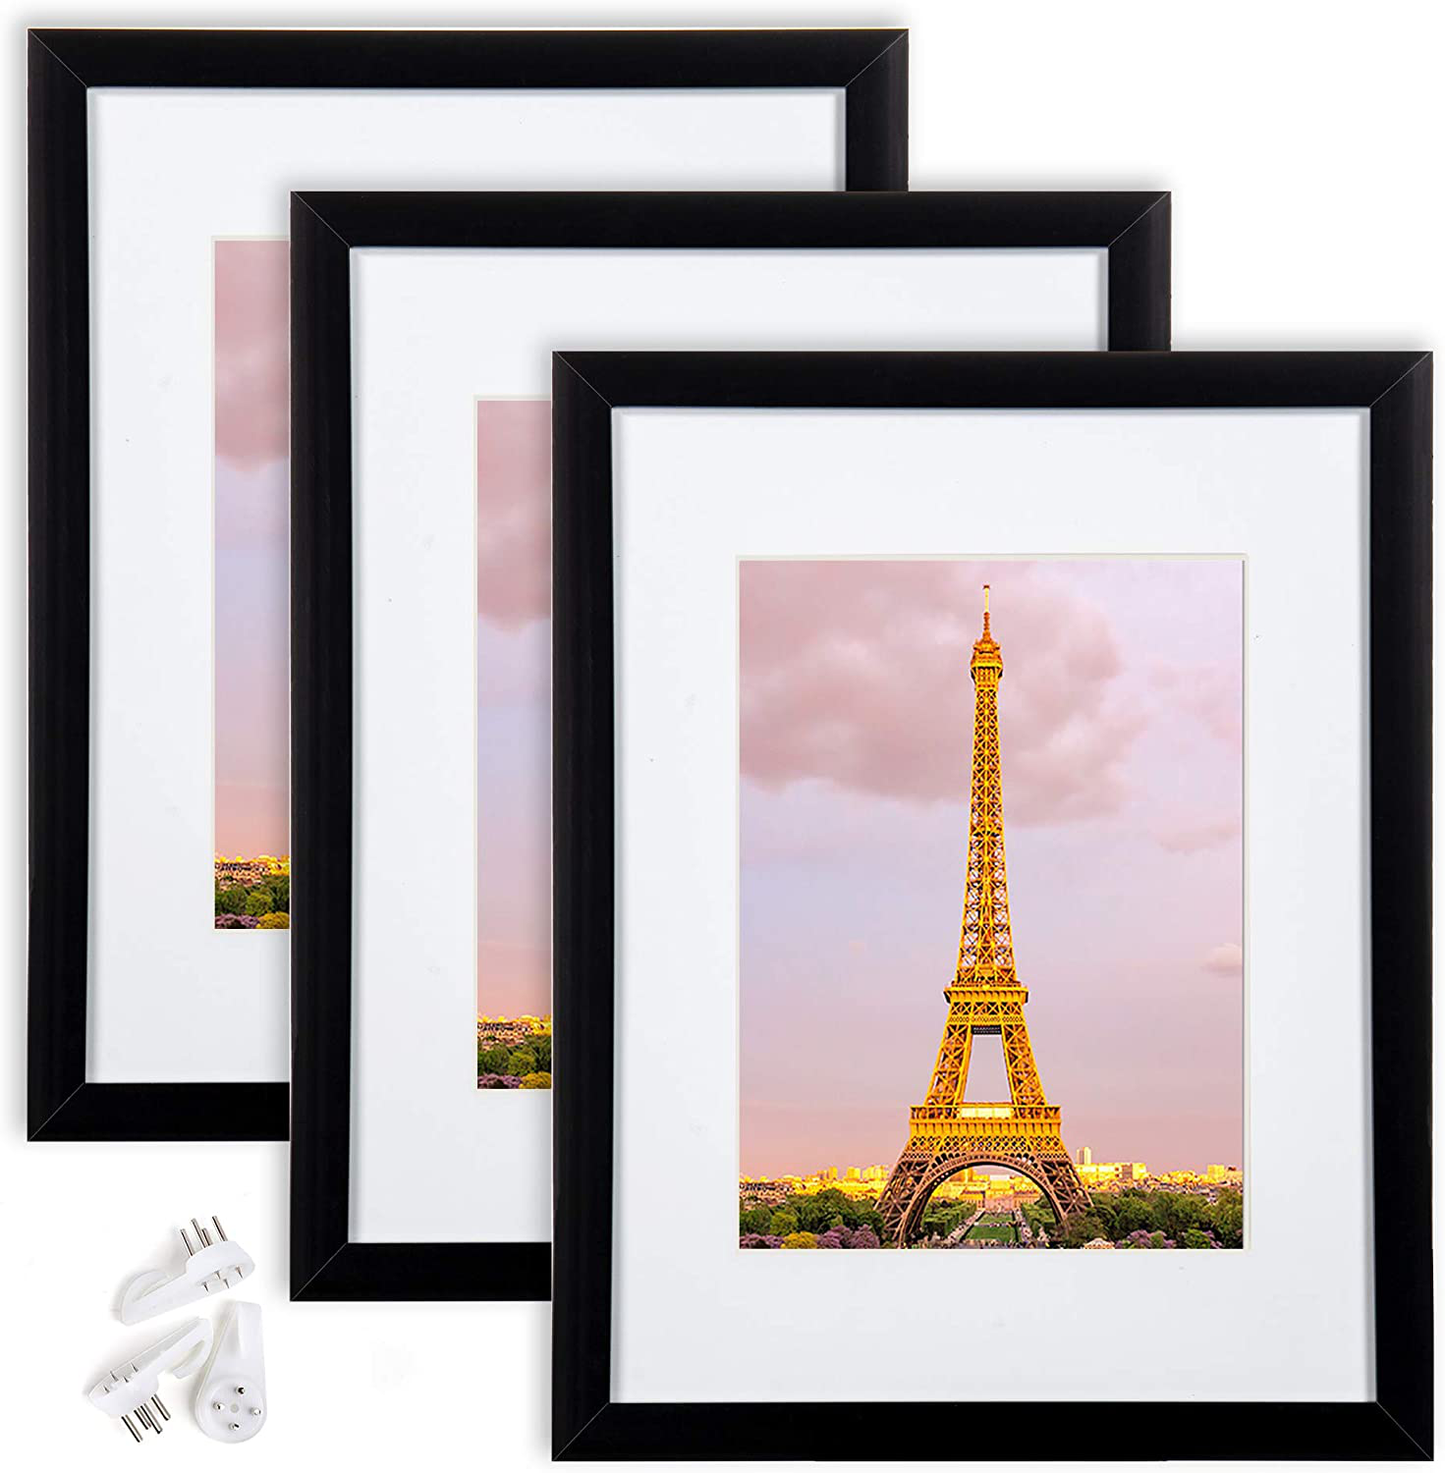 upsimples 8.5x11 Picture Frame Set of 3,Made of High Definition Glass for 6x8 with Mat or 8.5x11 Without Mat,Wall Mounting Photo Frame Gold